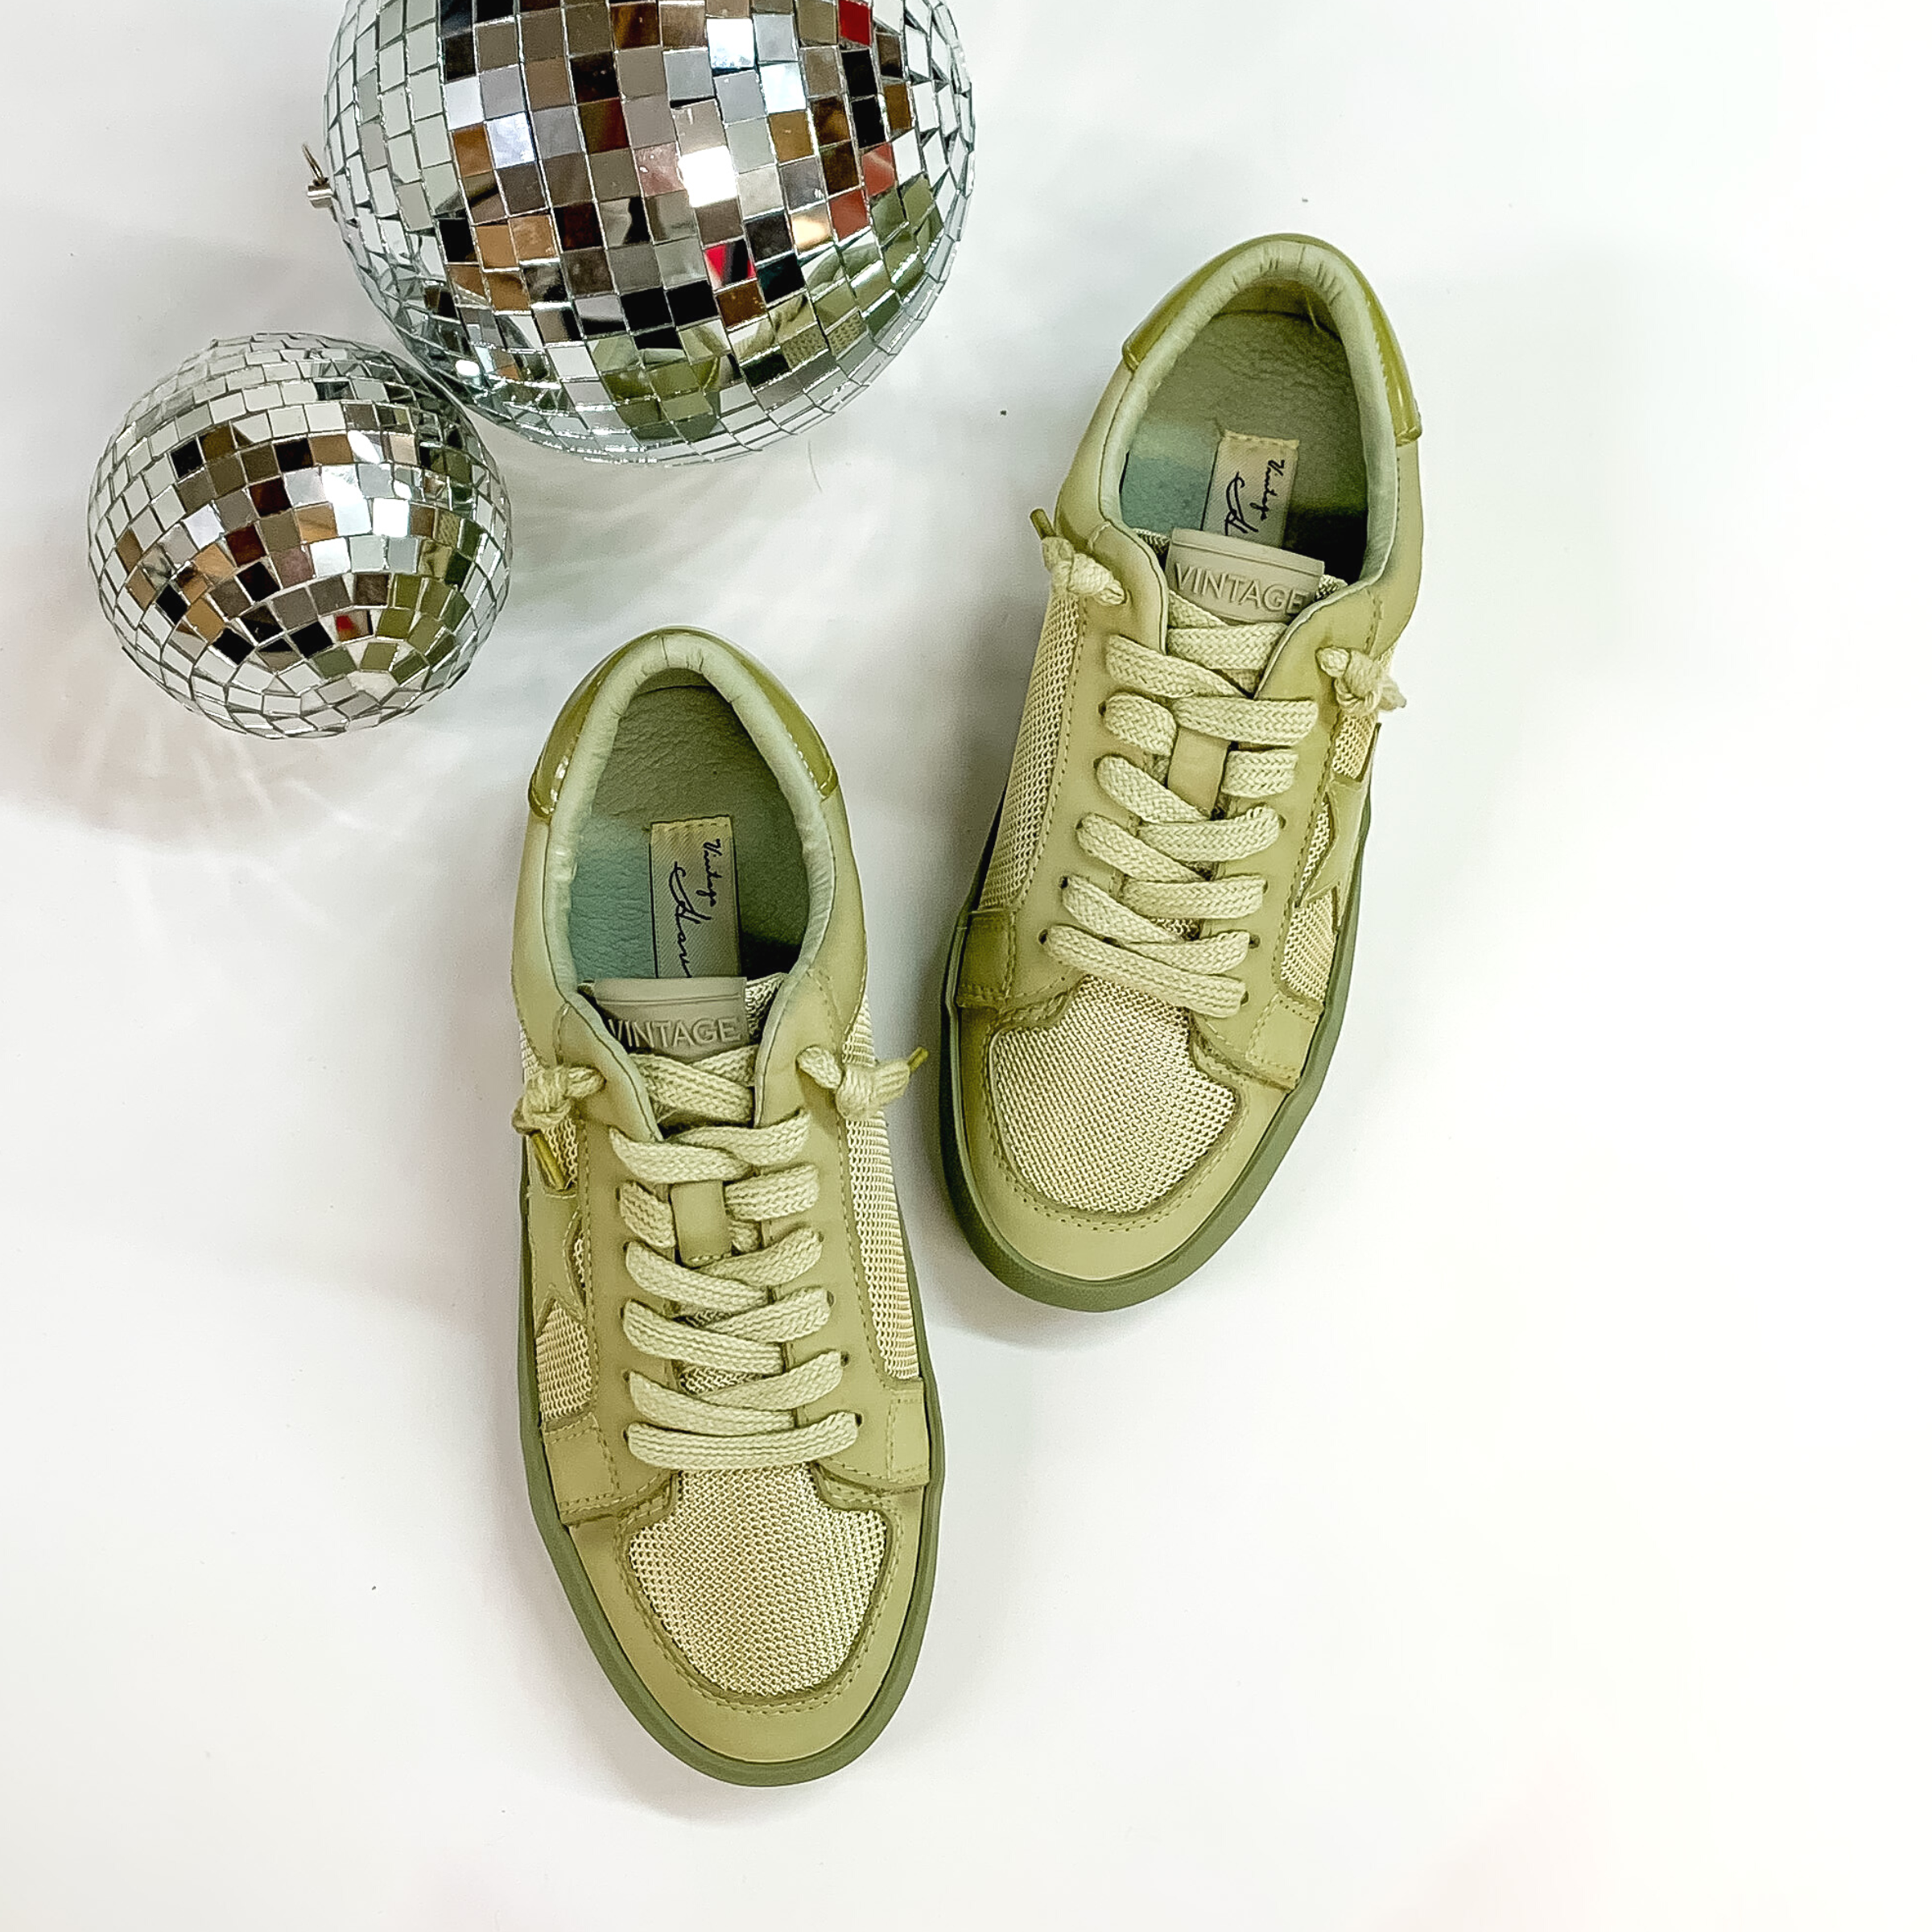 Vintage Havana | Extra Dip Dye Sneakers in Olive Green - Giddy Up Glamour Boutique